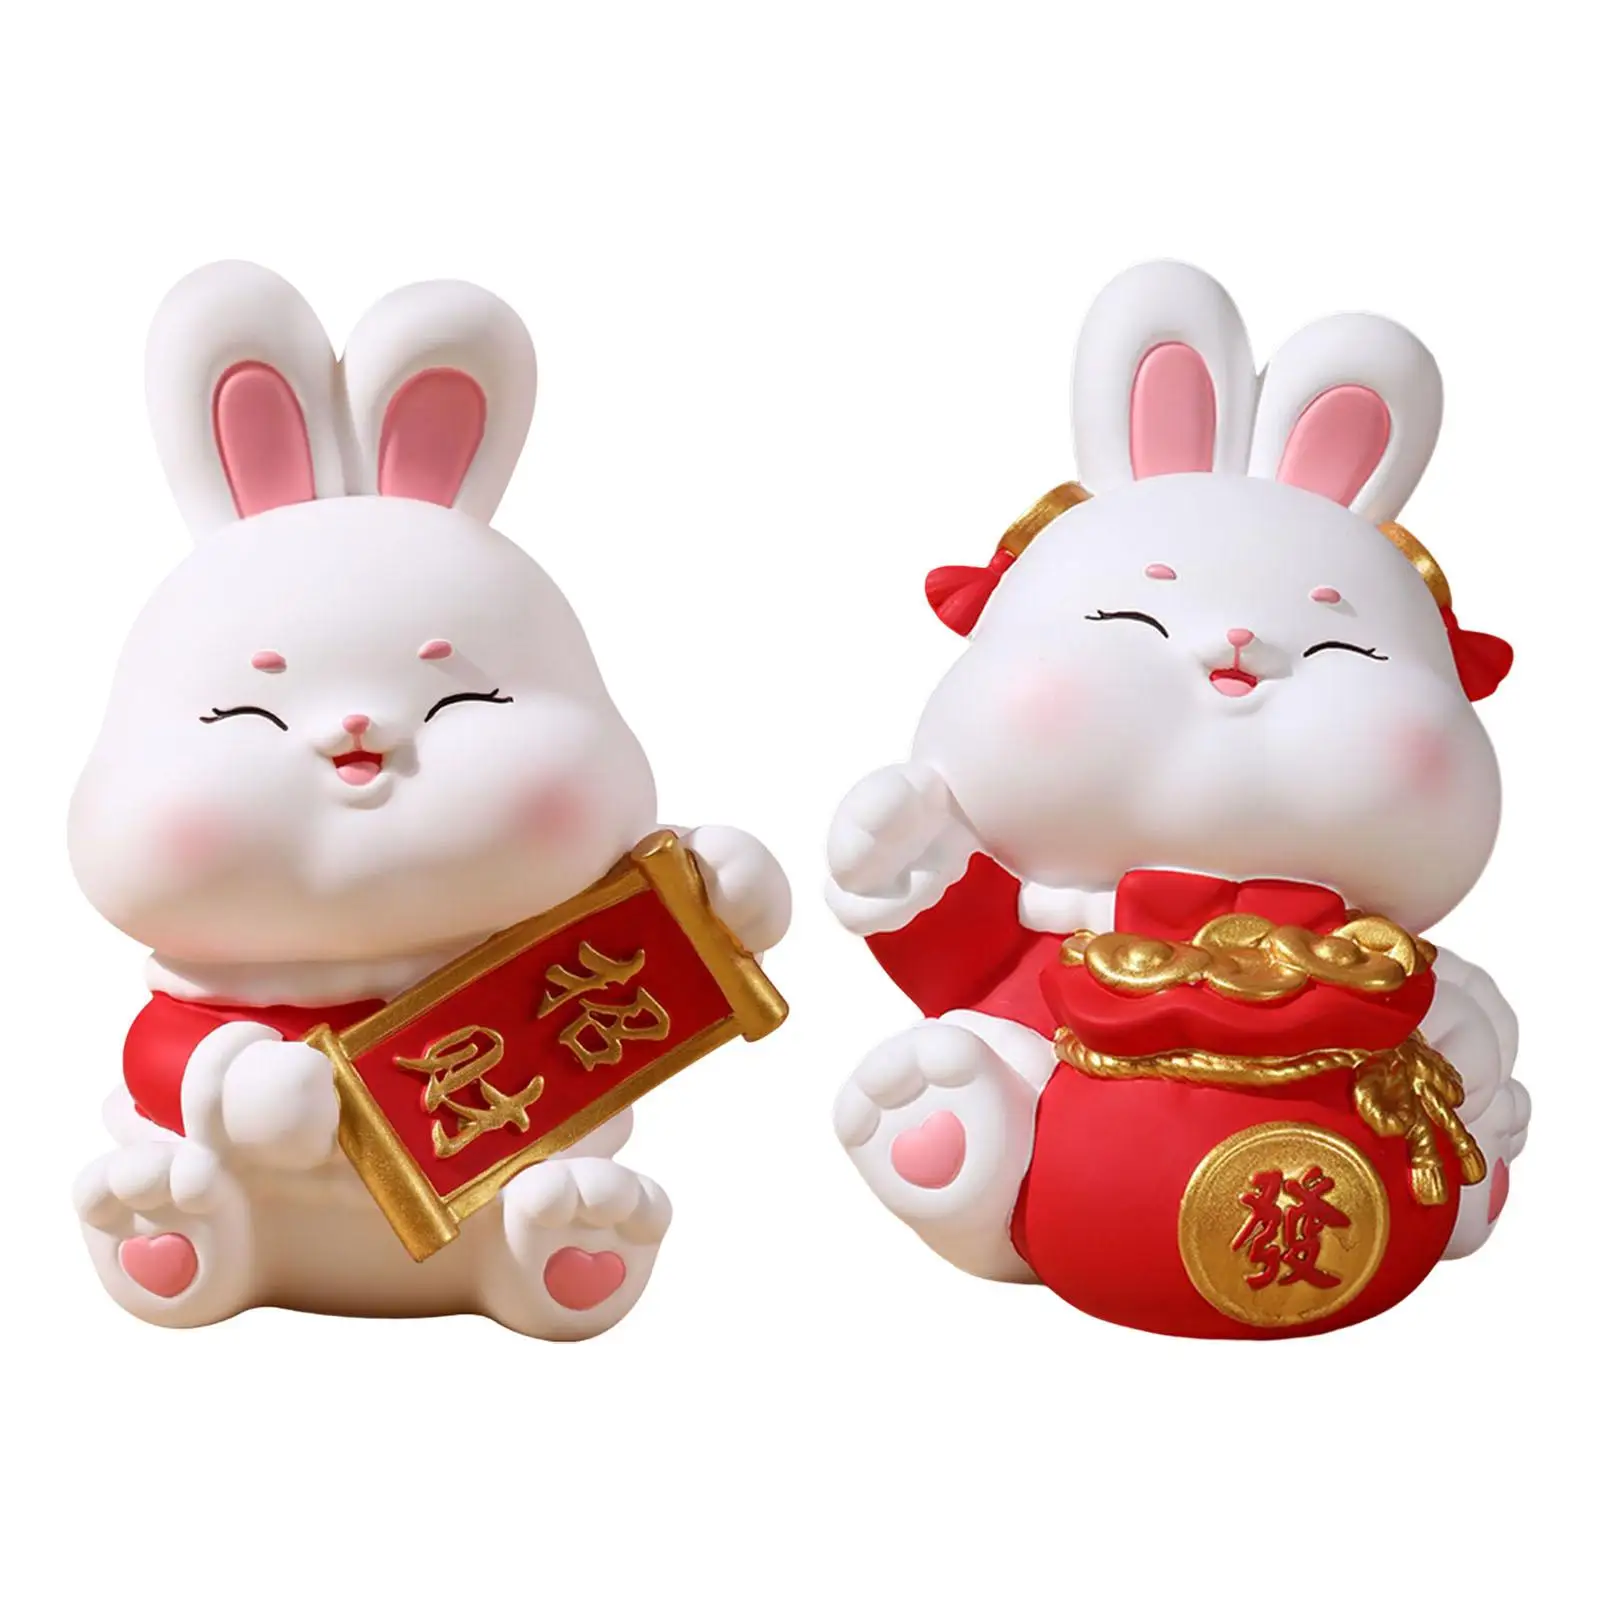 Rabbit Piggy Bank Animal Bunny Statue Storage Sculpture Ornament Case Money Box for Bedroom Home Boys and Girls New Years Gifts